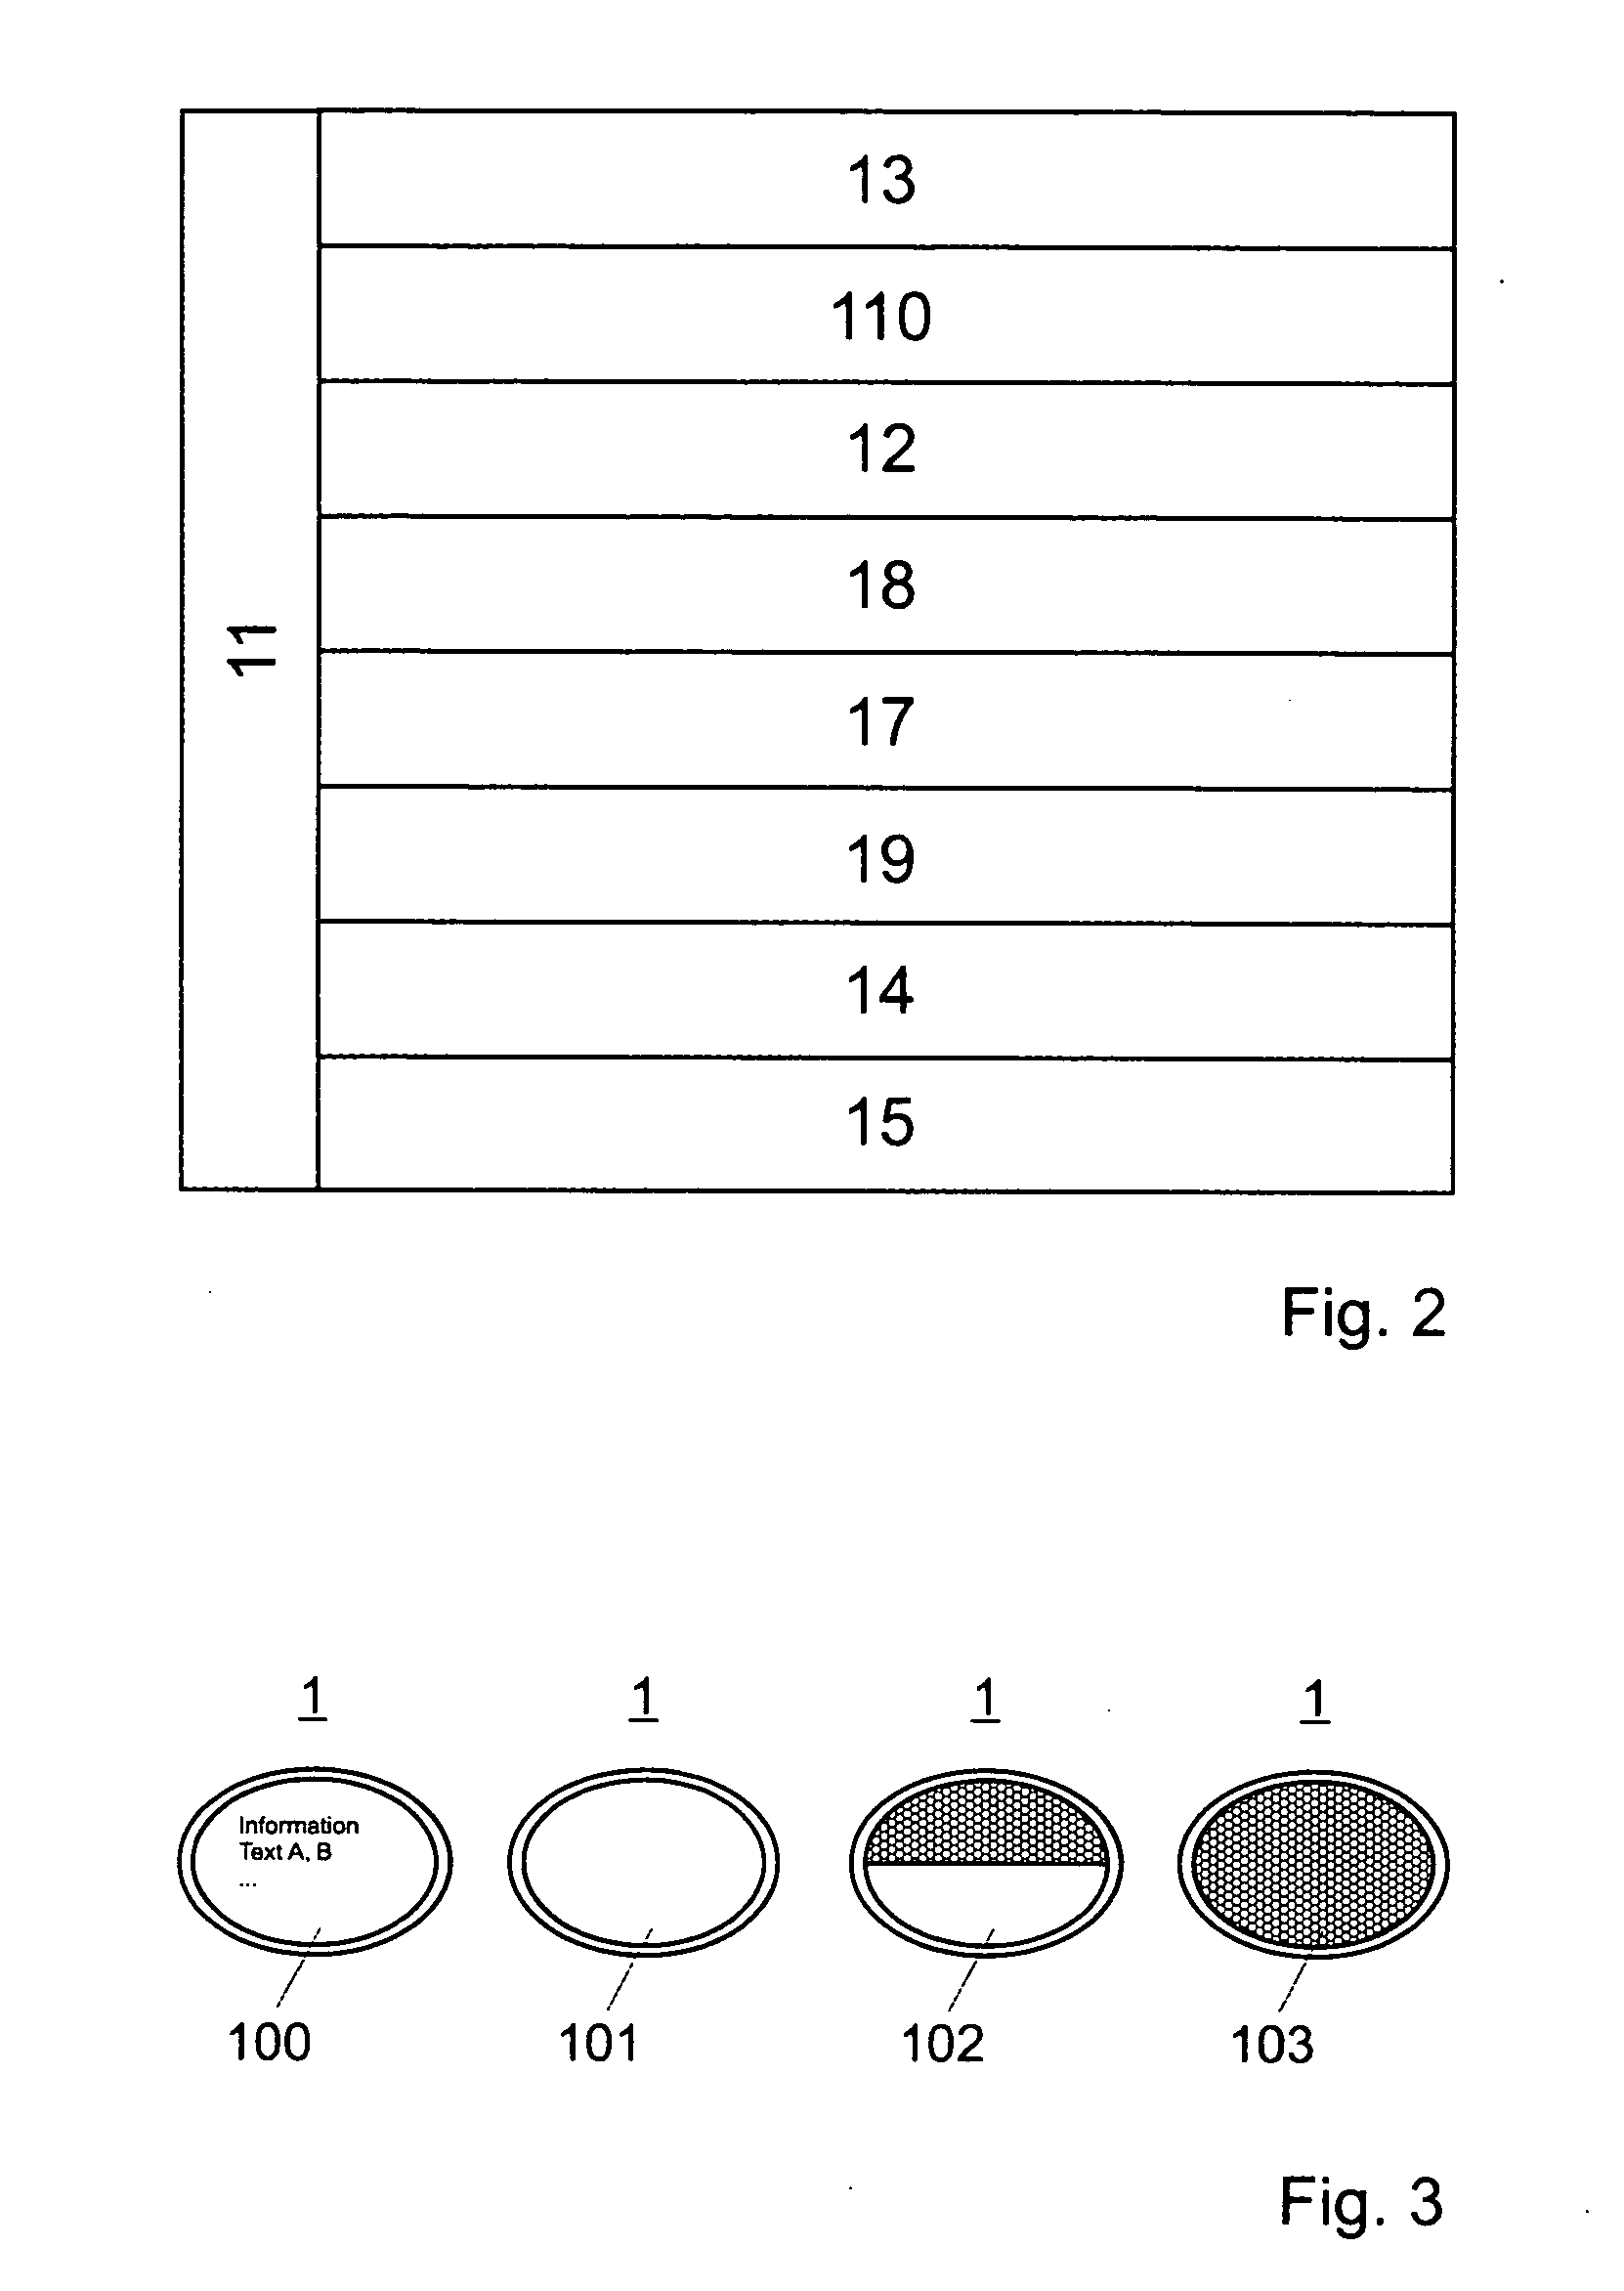 Communication device, system and method